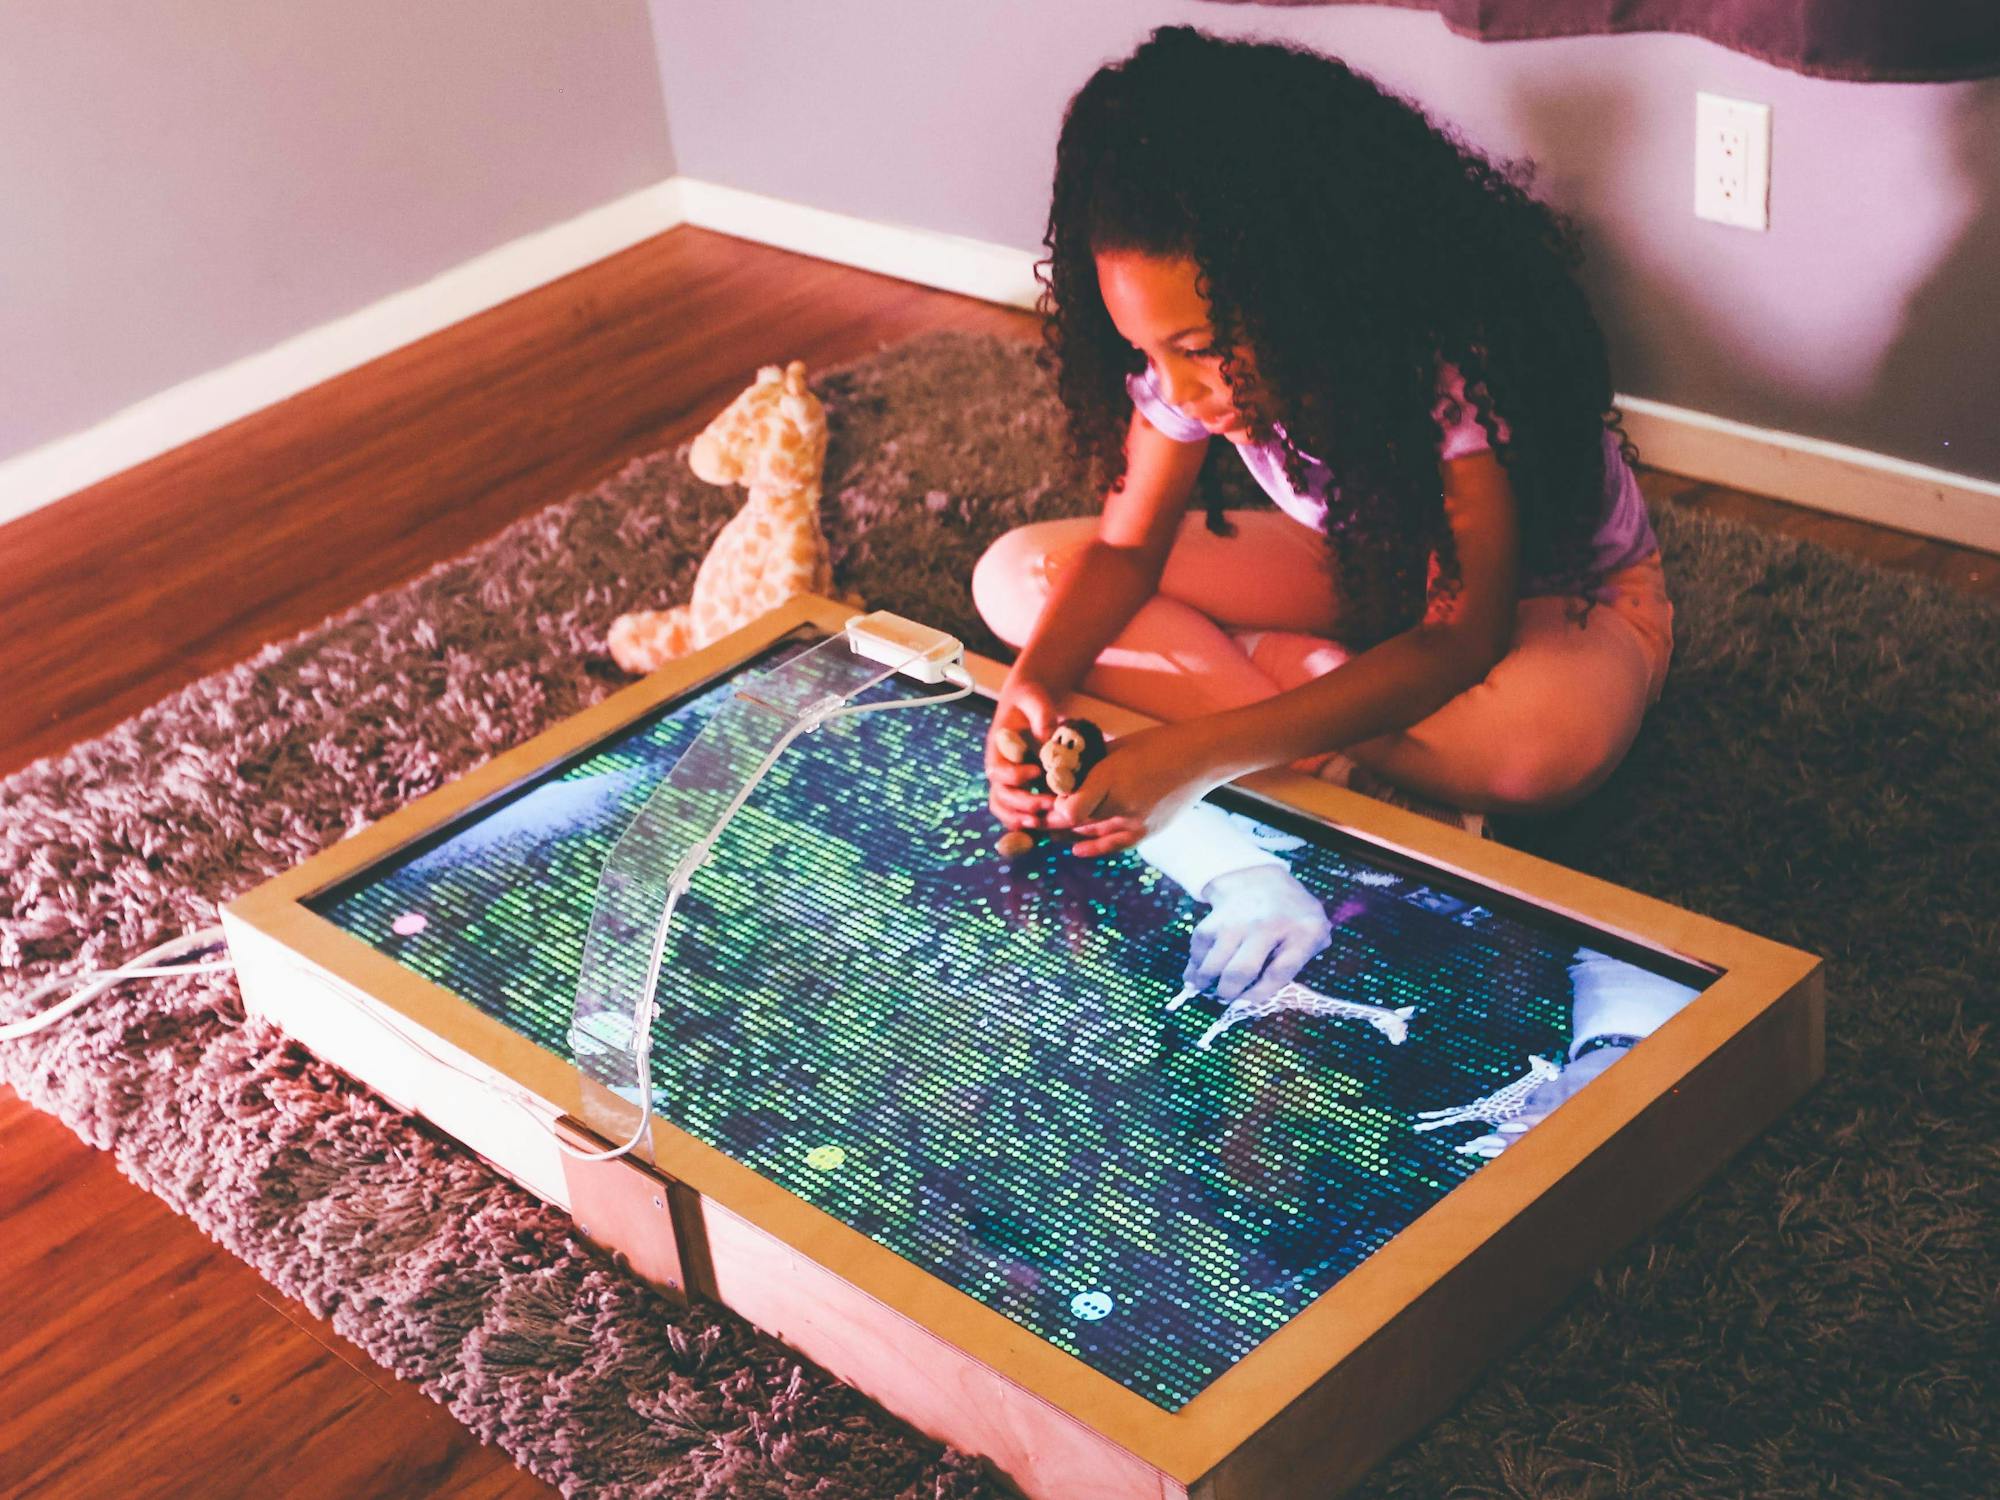 Young girl looking at table with digital display